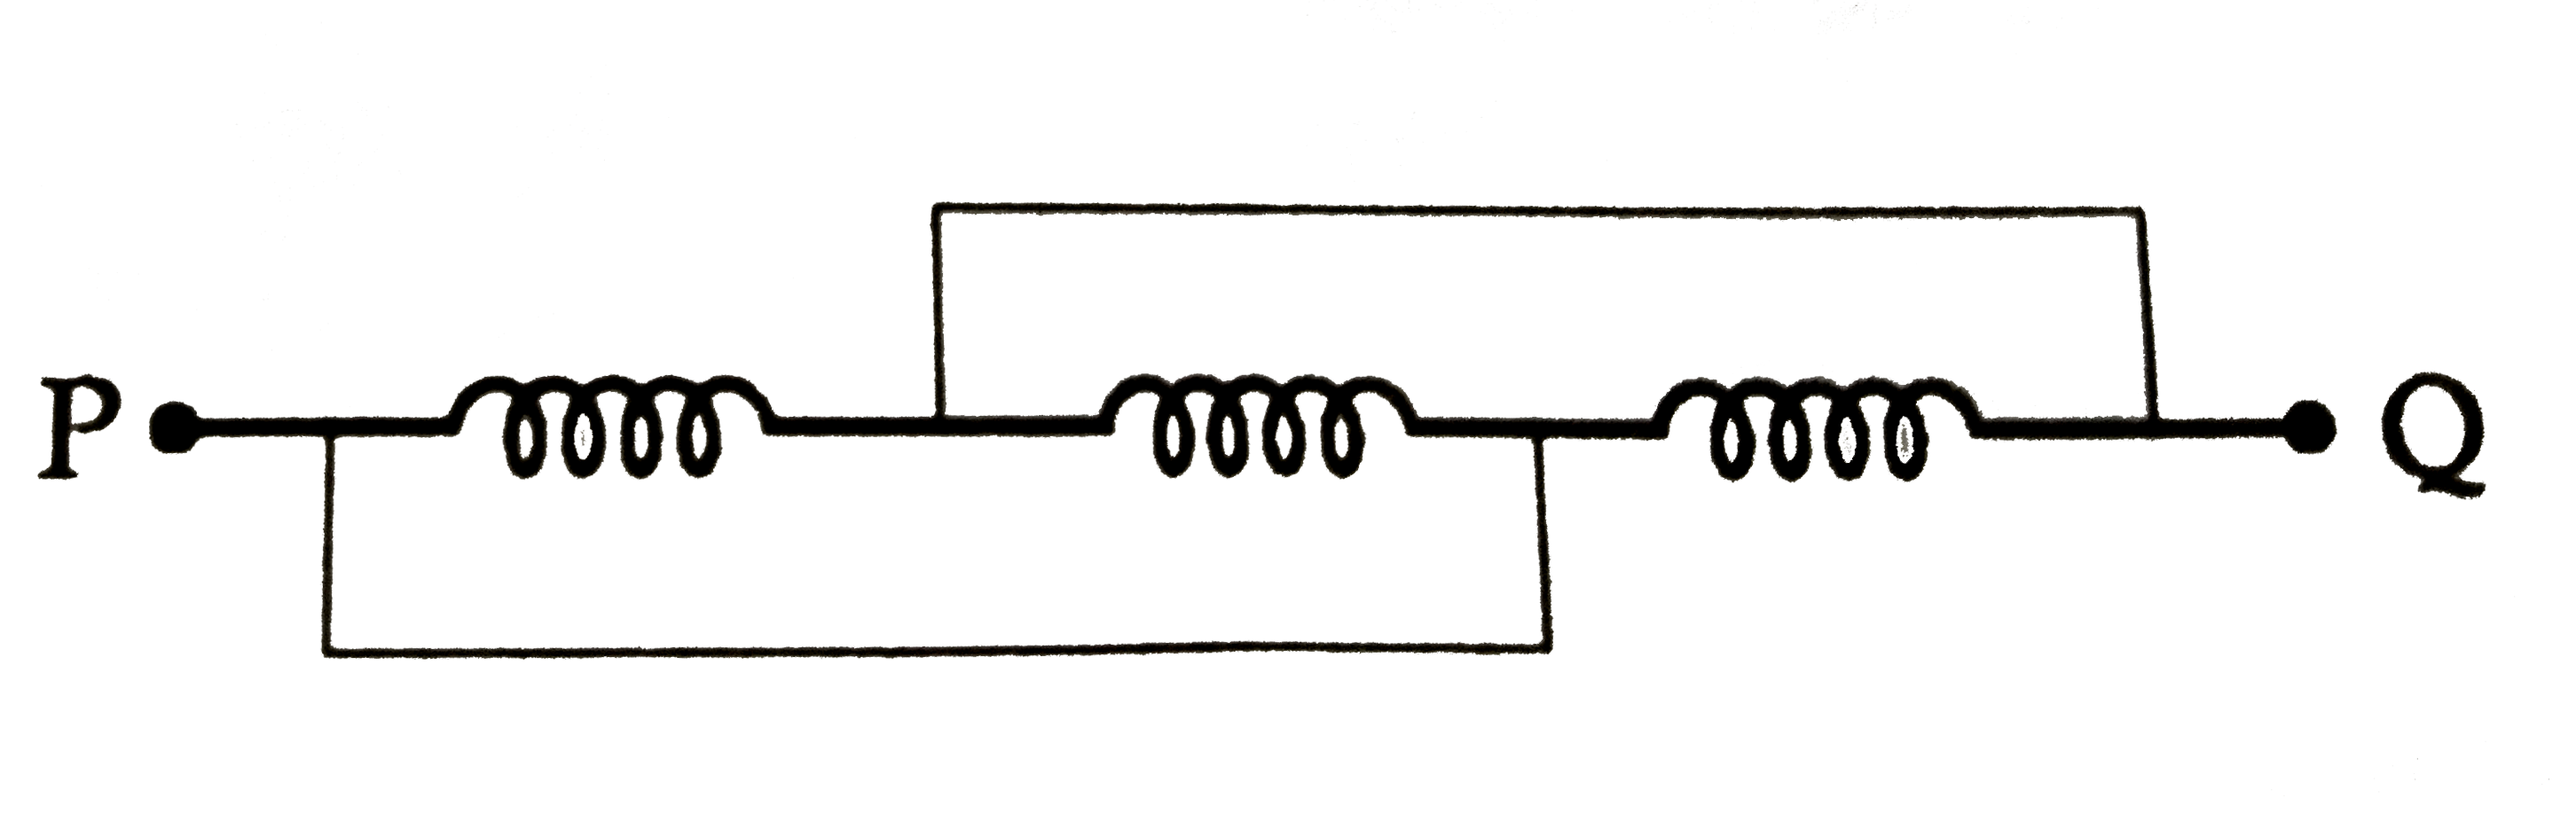 Pure inductors each of inductance 3 H are connected as shown in figure. The equivalent inductance of the circuit is